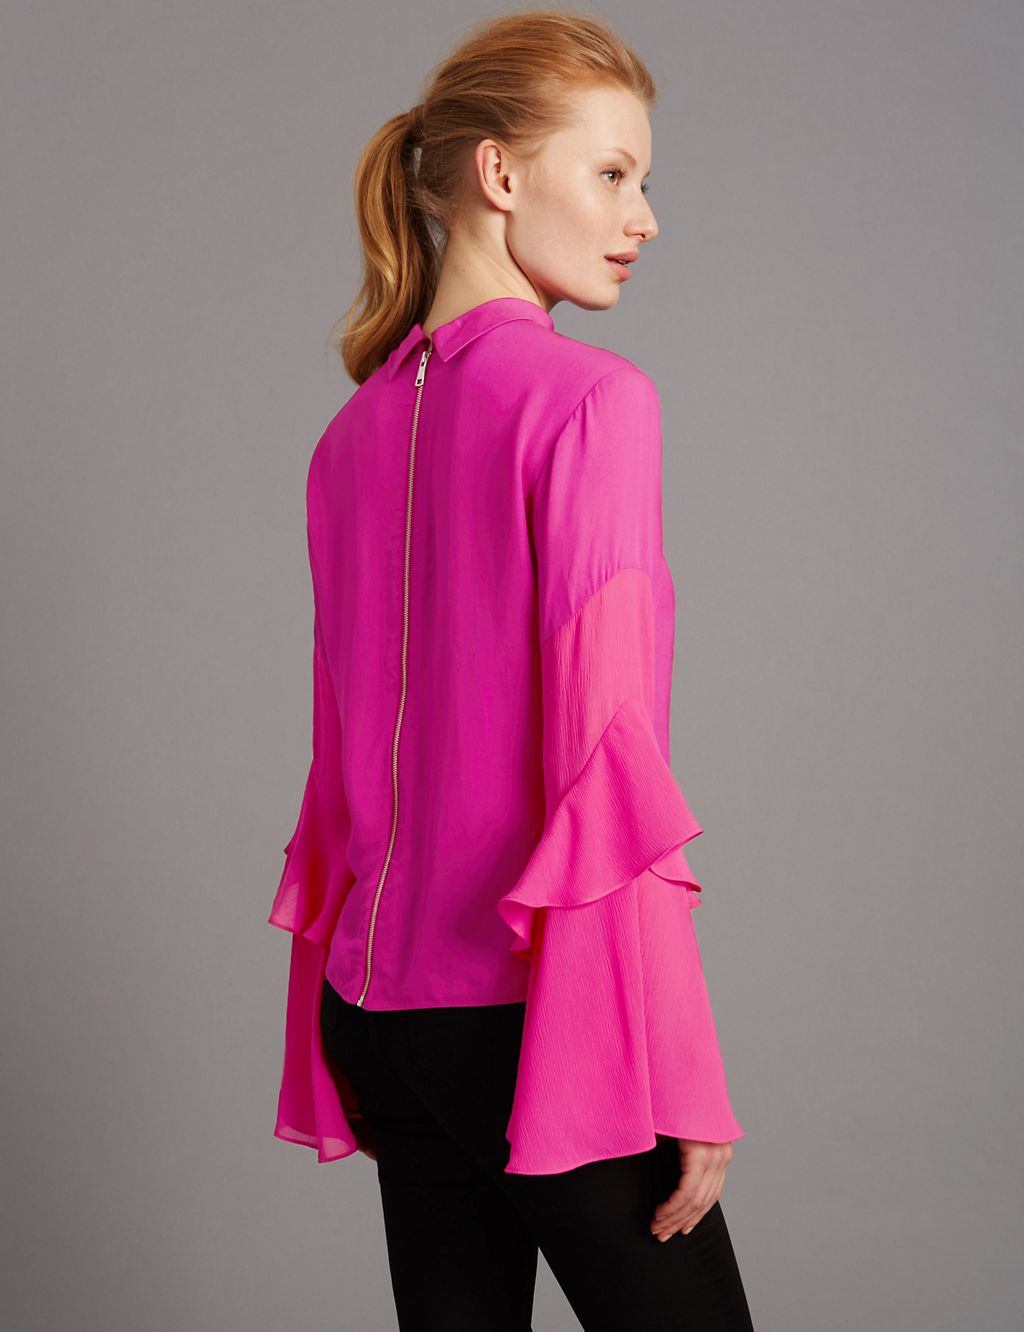 Statement Sleeve Blouse 2 of 4